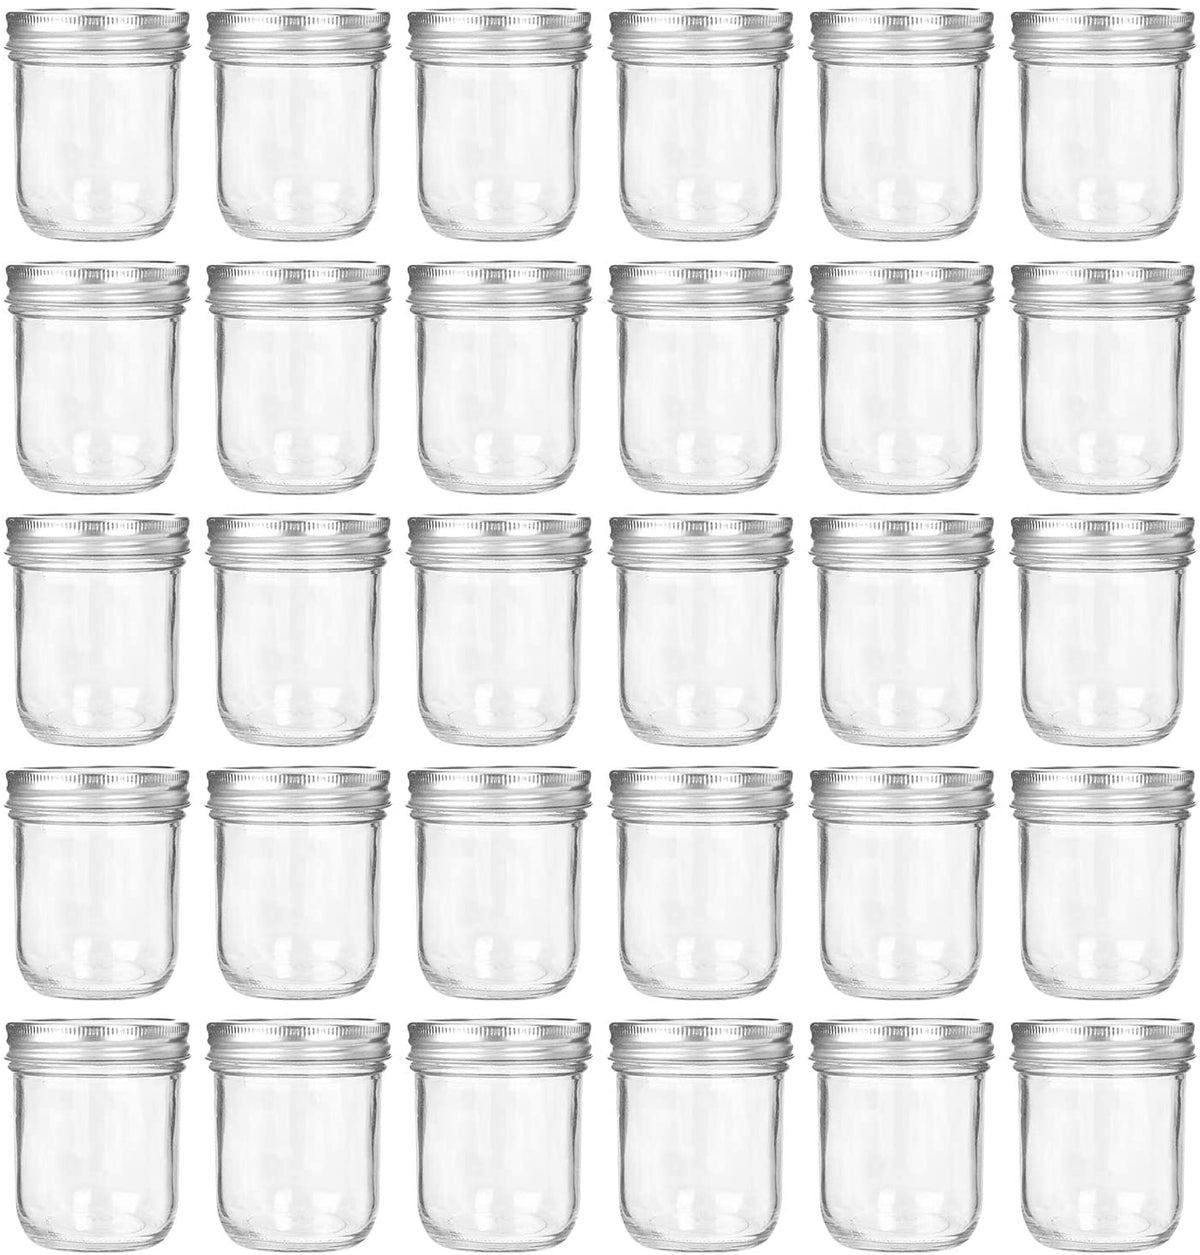 180ml Mason Jars Glass Jelly Jars, Canning Jars With Regular Lids, Ideal for Honey,Jam,Baby Foods,Wedding Favors,Shower Favors, 24 Pack - Willow